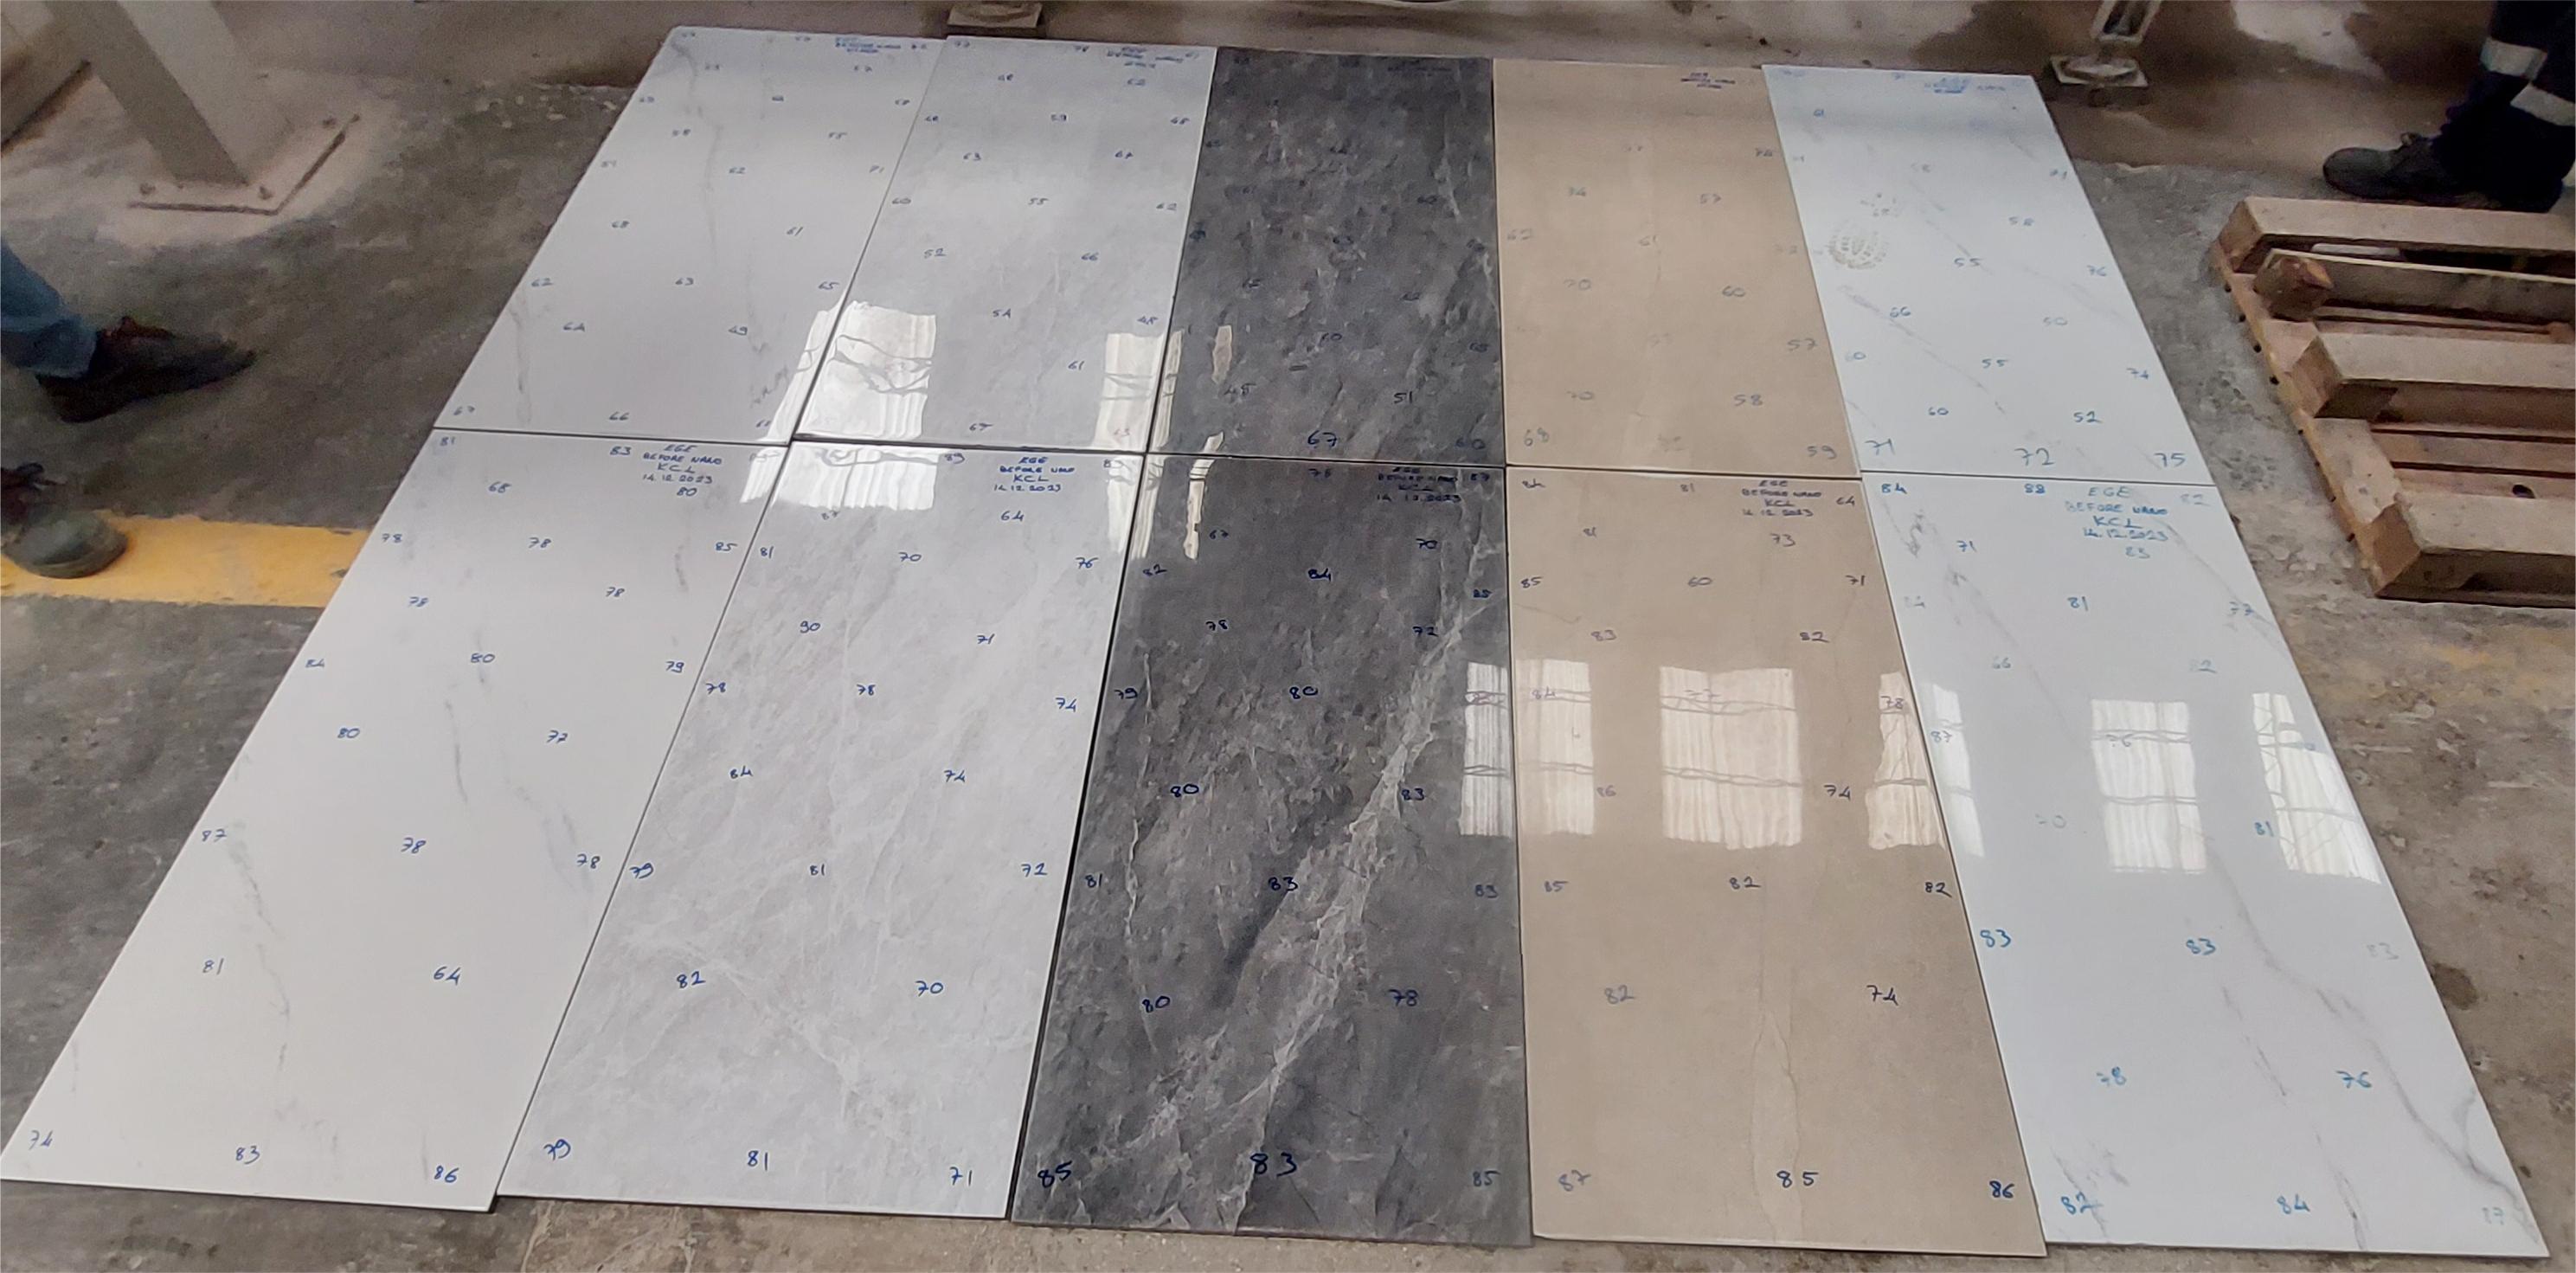 Display of various glaze tile polishing effects after customers used KCL abrasive